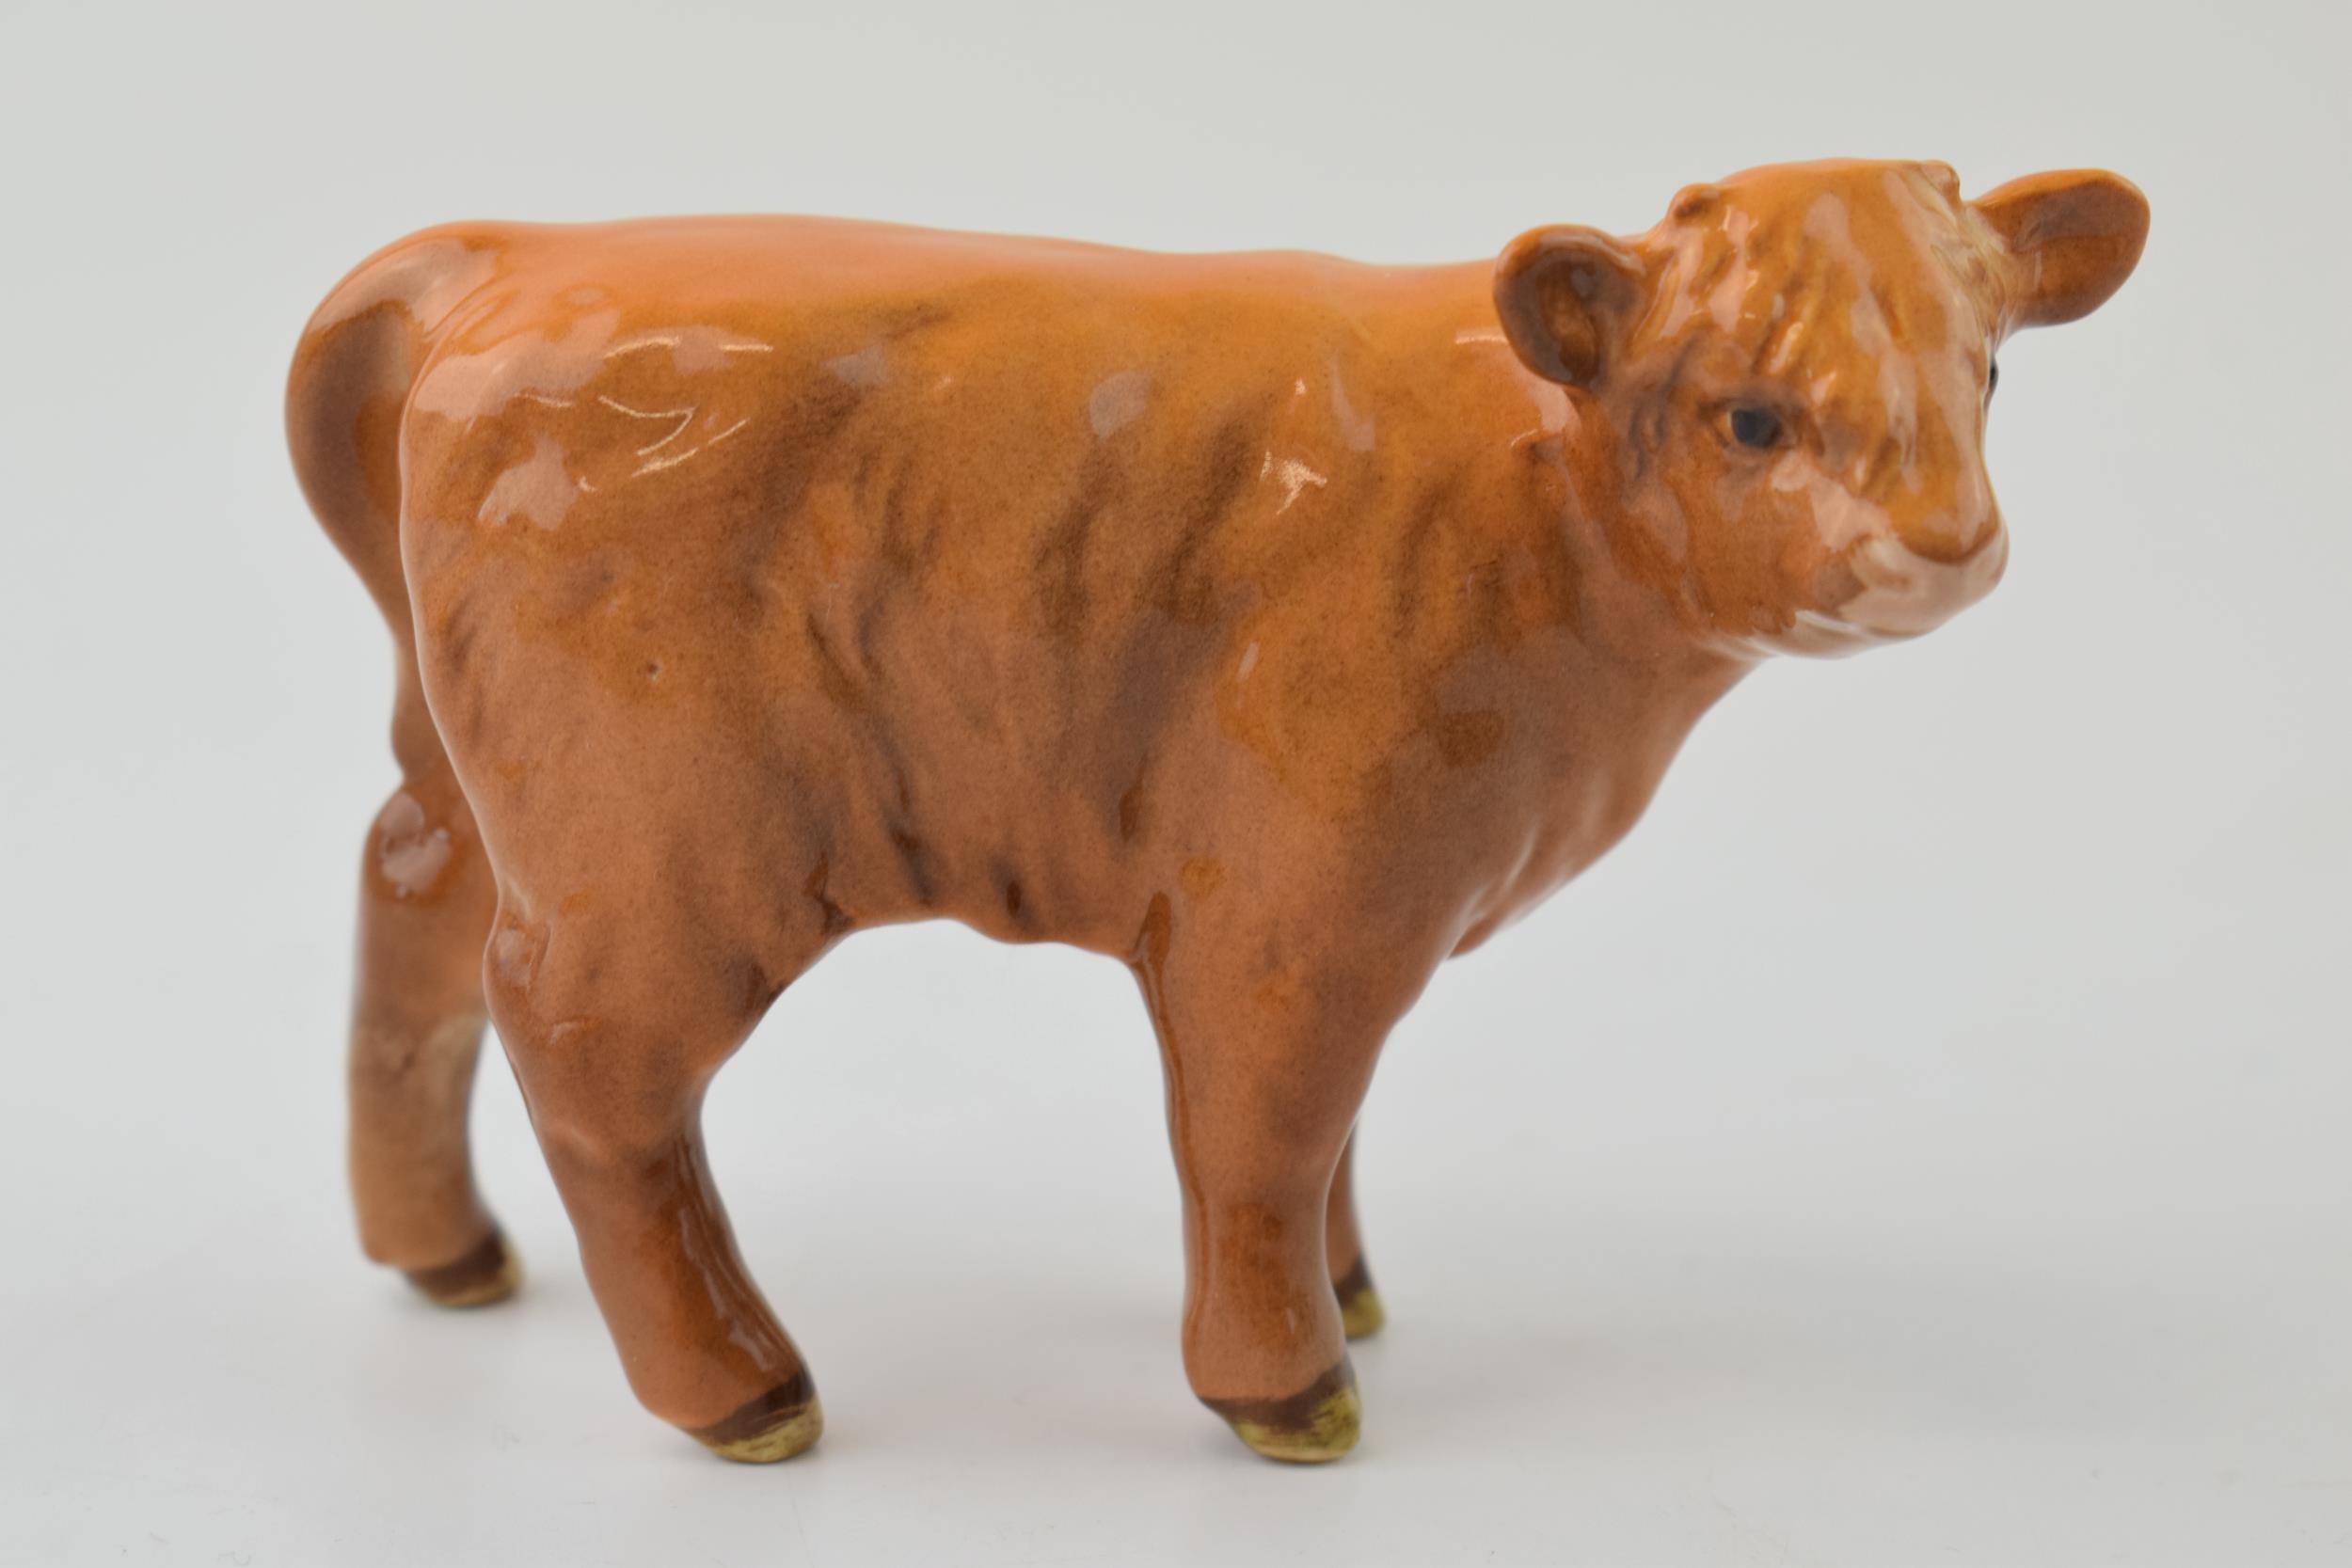 Beswick Highland Calf 1827D. In good condition with no obvious damage or restoration.